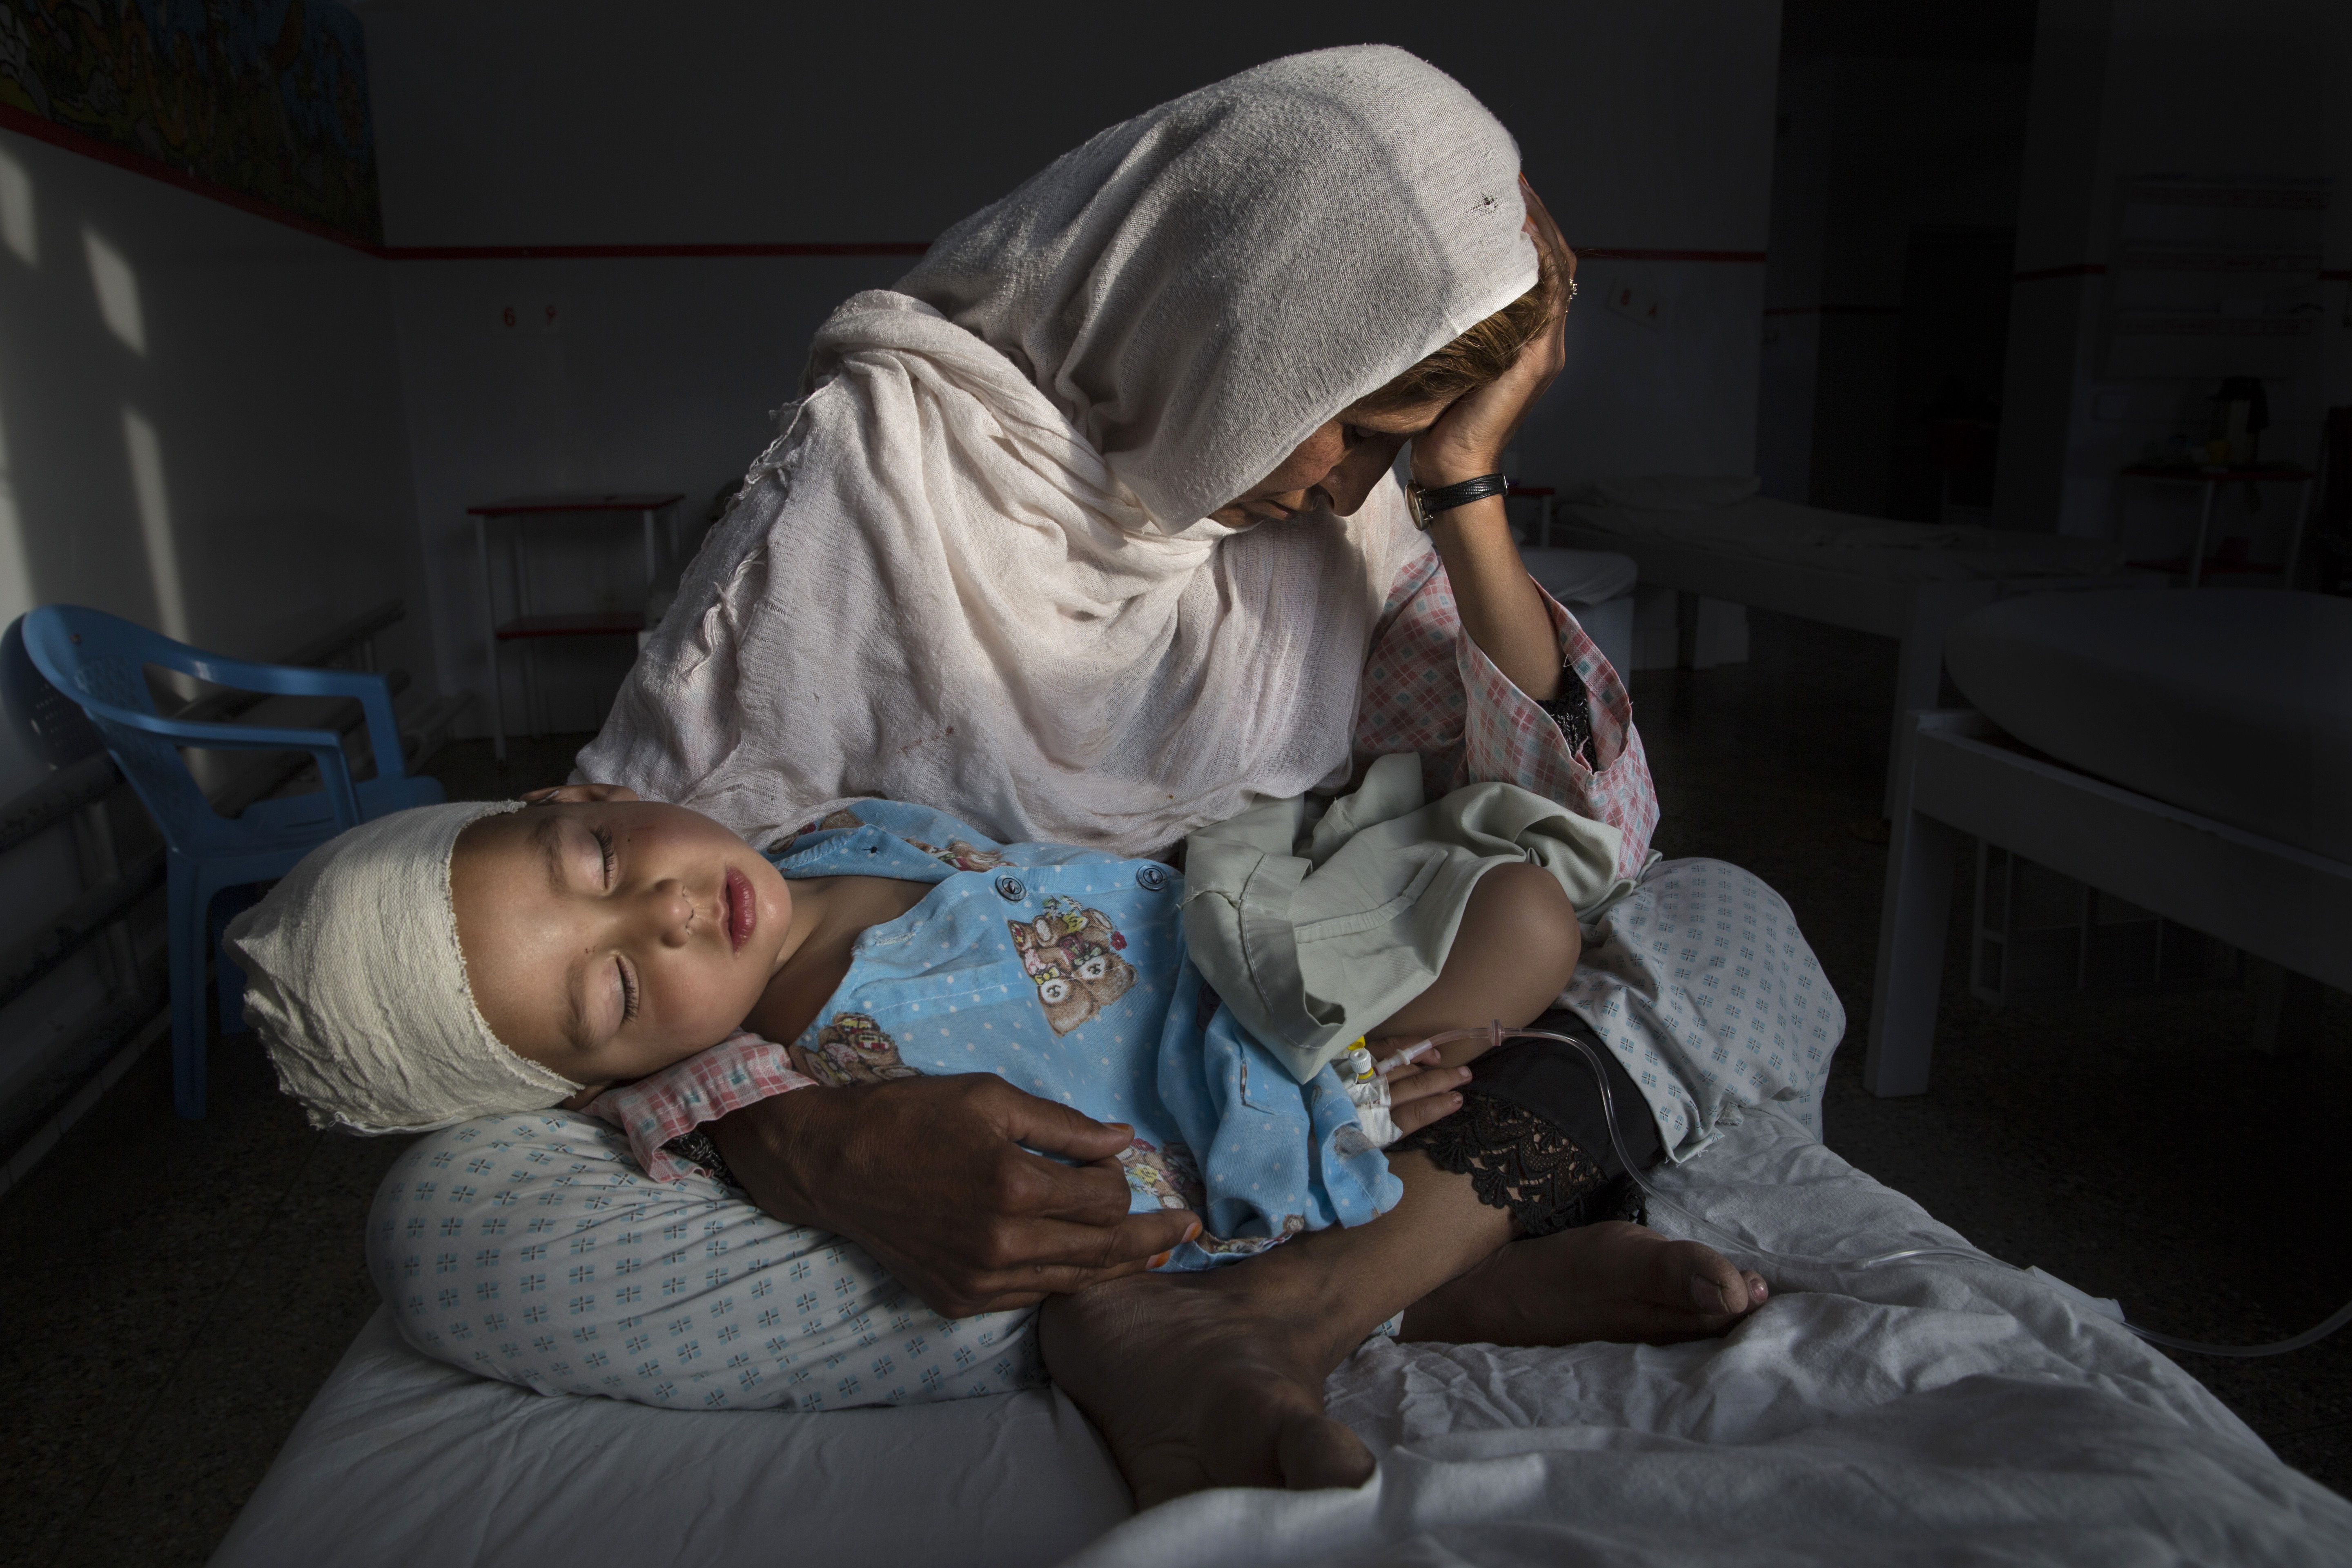 Najiba holds her nephew, Shabir, who was injured from the same bomb blast that killed his sister. Najiba watched over the children while Shabir’s mother buried her daughter. Image by Paula Bronstein. Afghanistan, 2015. 